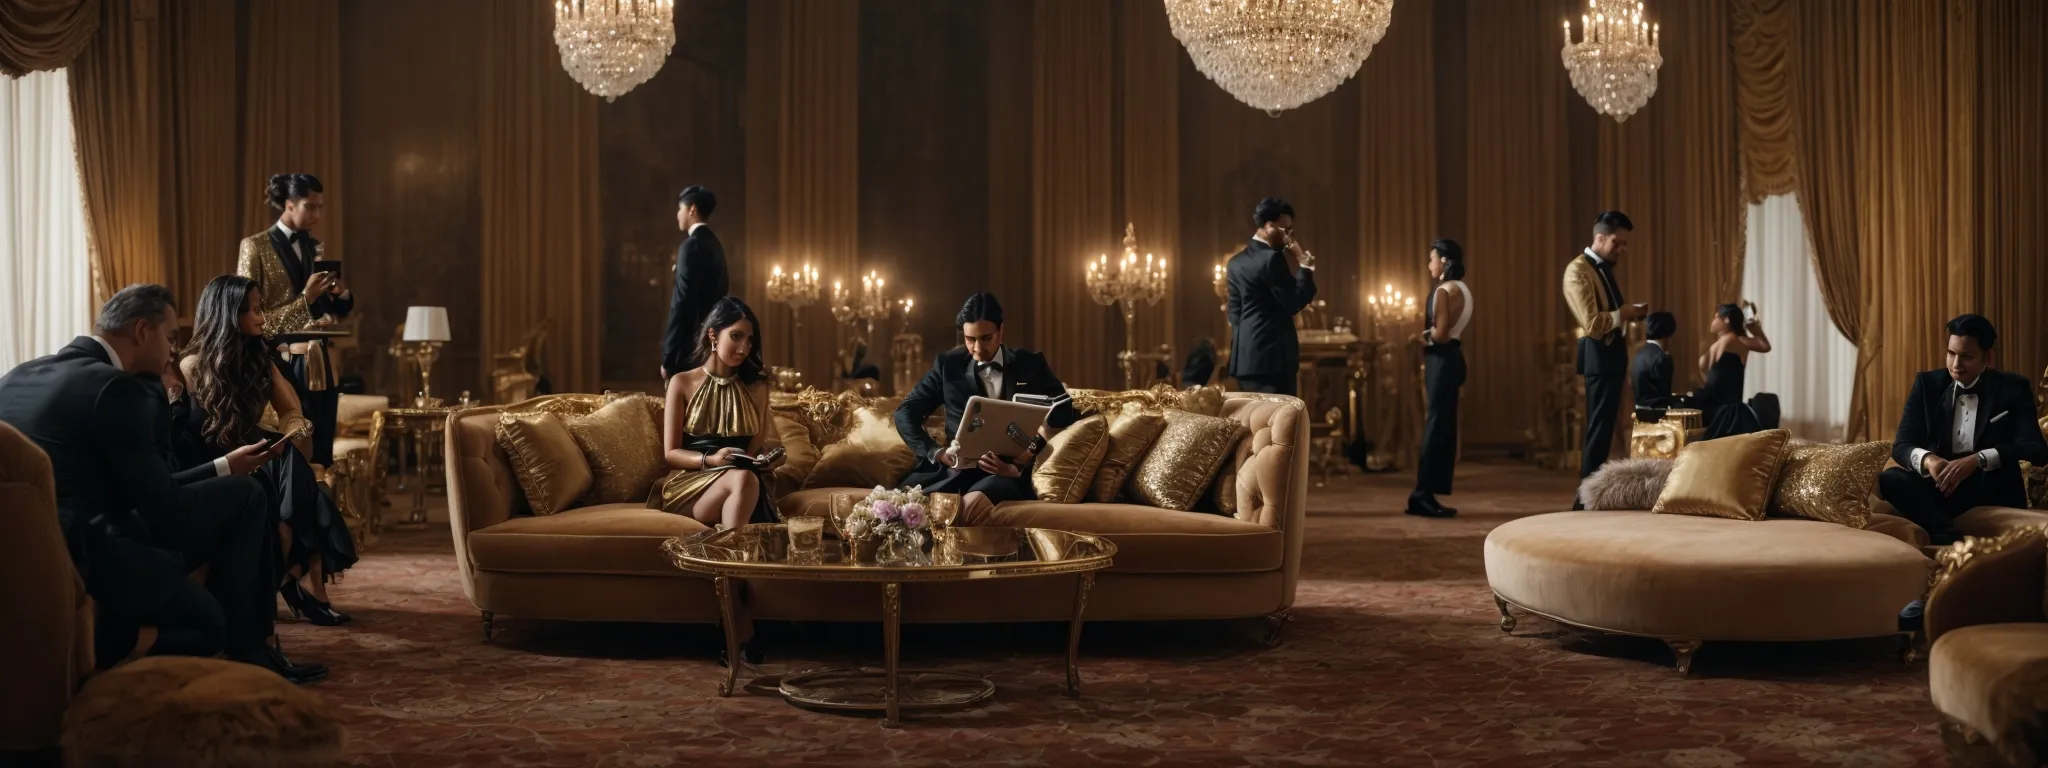 an opulent room where a glittering, diamond-studded ipad lies at the center of a velvet cushion, with influencers gathered around capturing the moment on their phones.